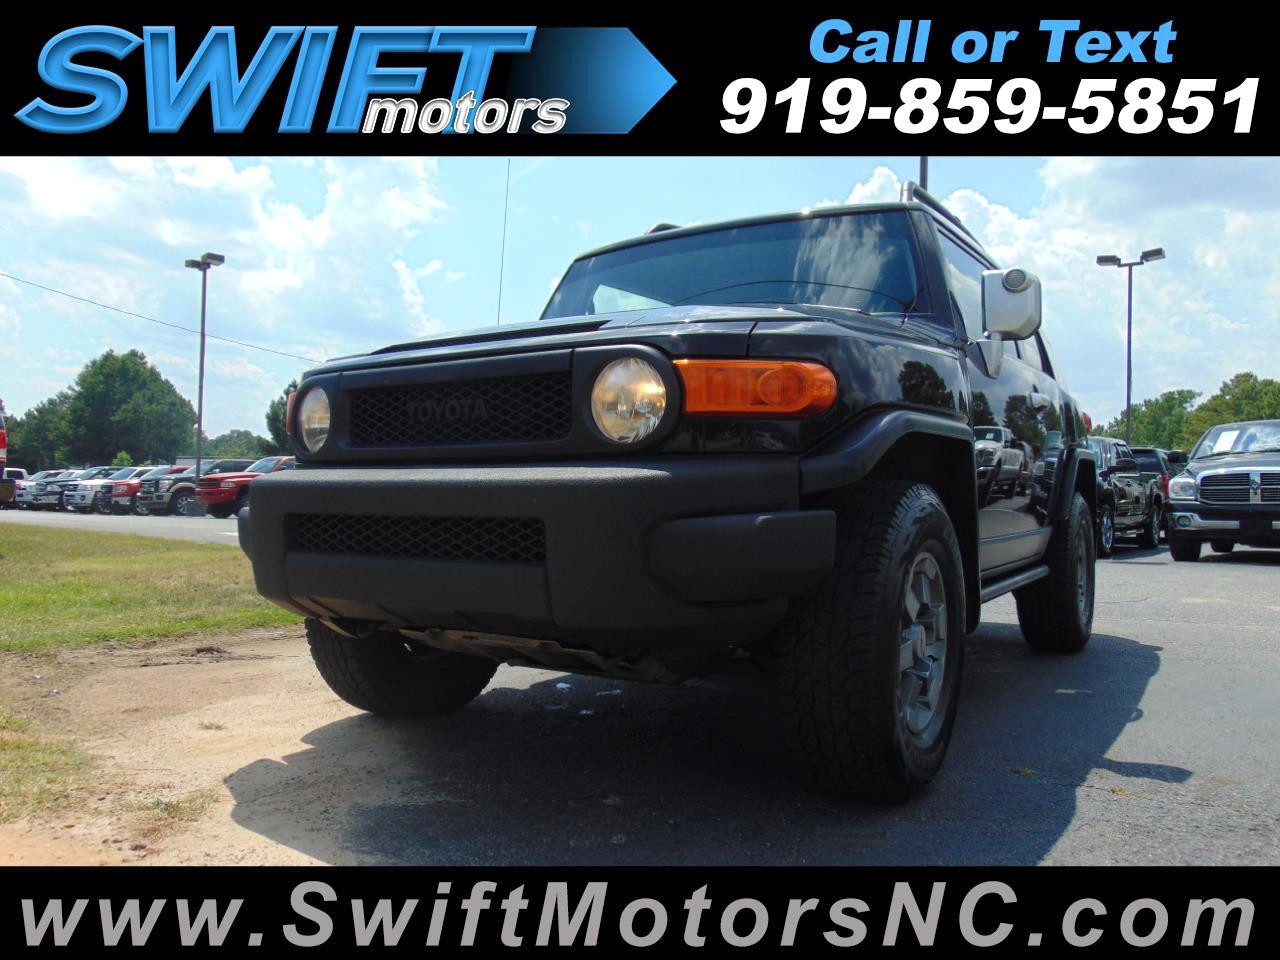 Used 2007 Toyota Fj Cruiser 4wd At For Sale In Raleigh Nc 27603